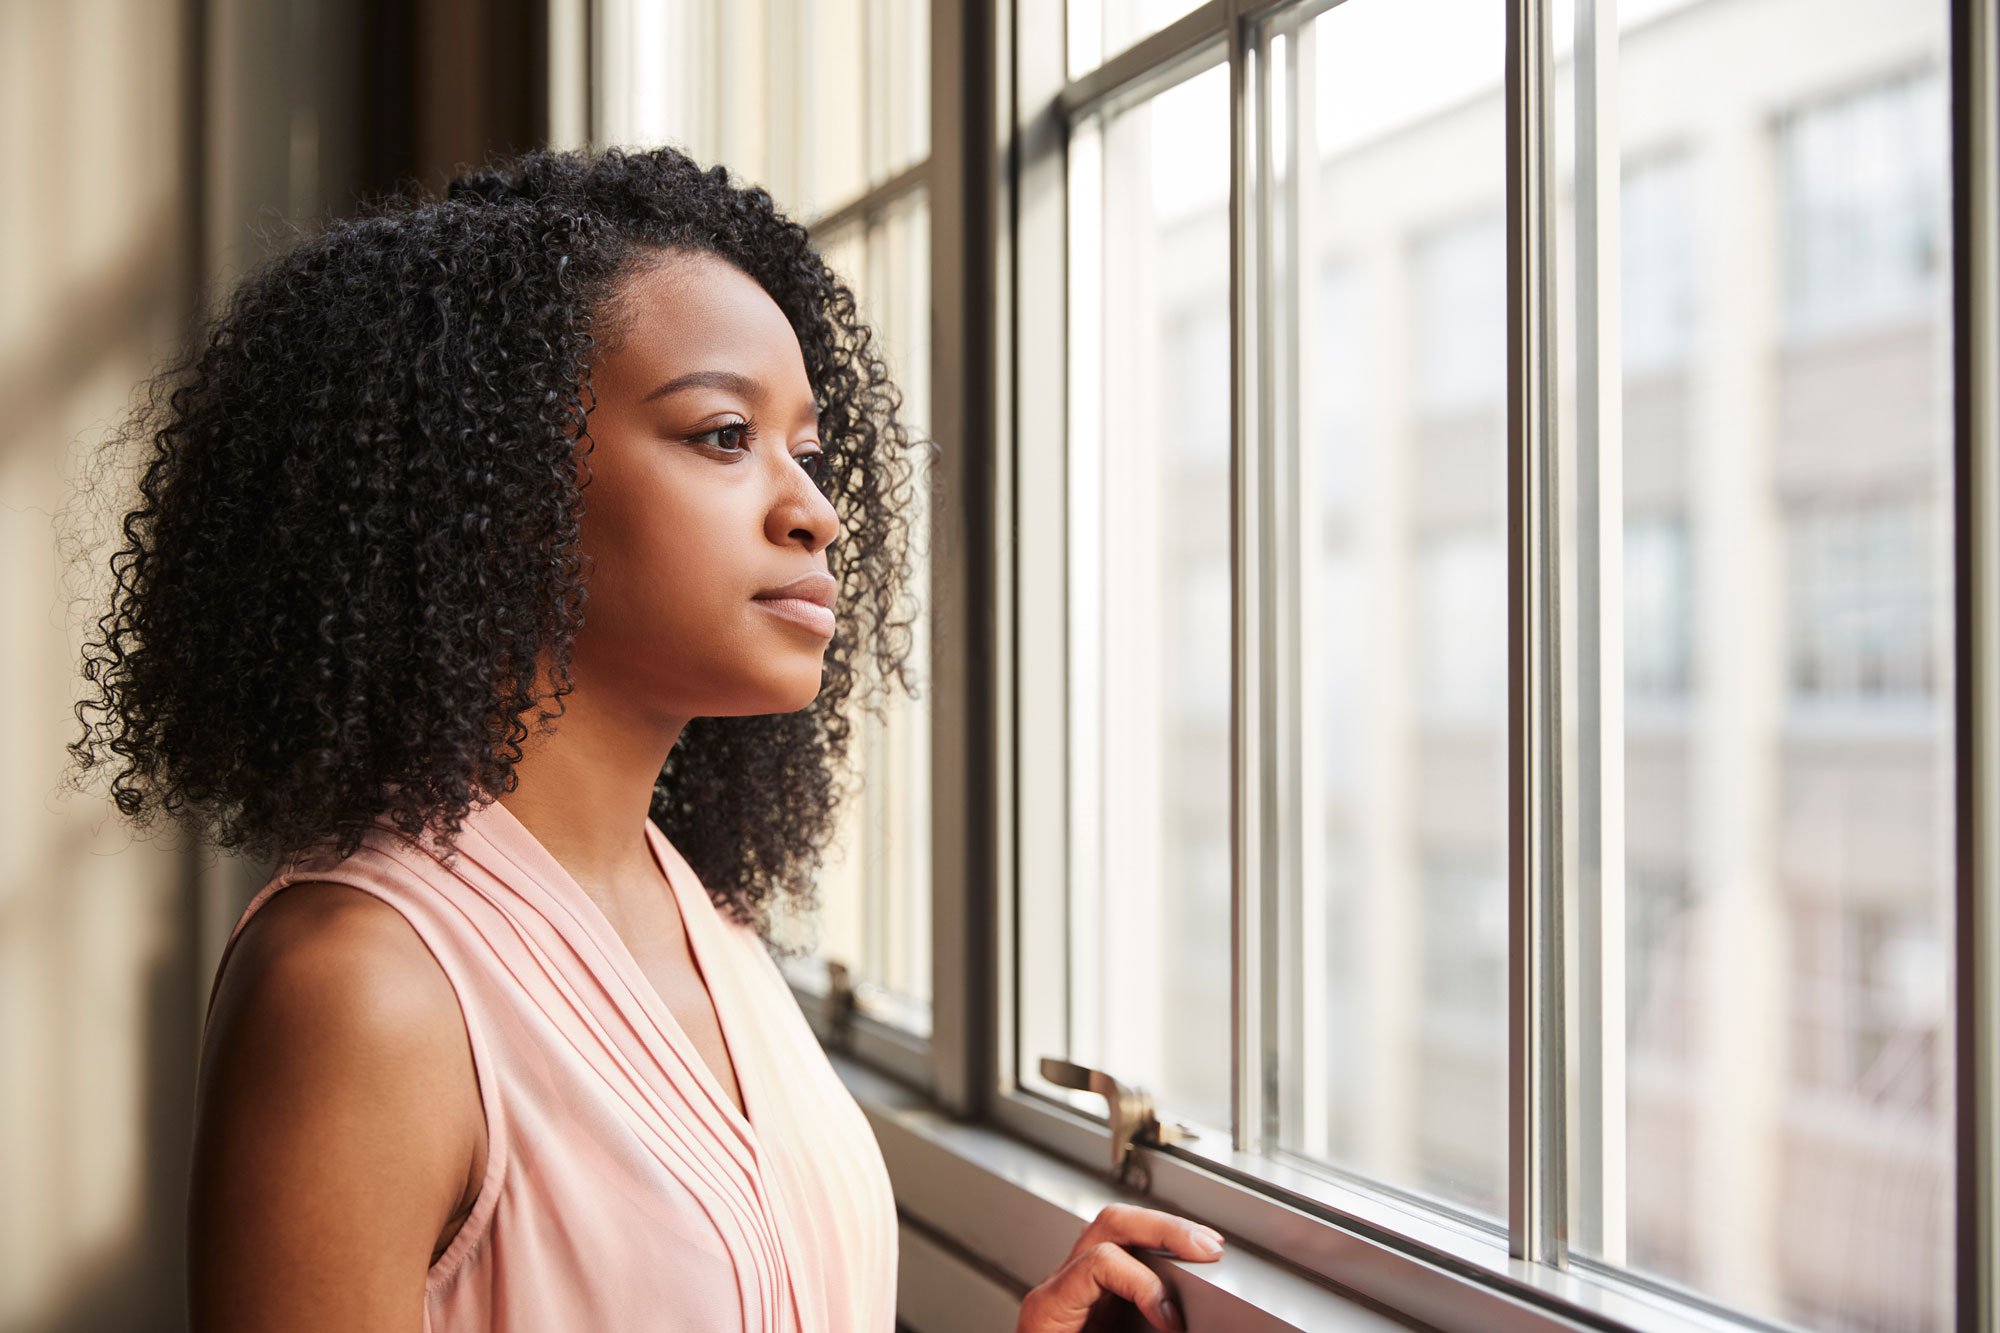 Woman starting pensively out window